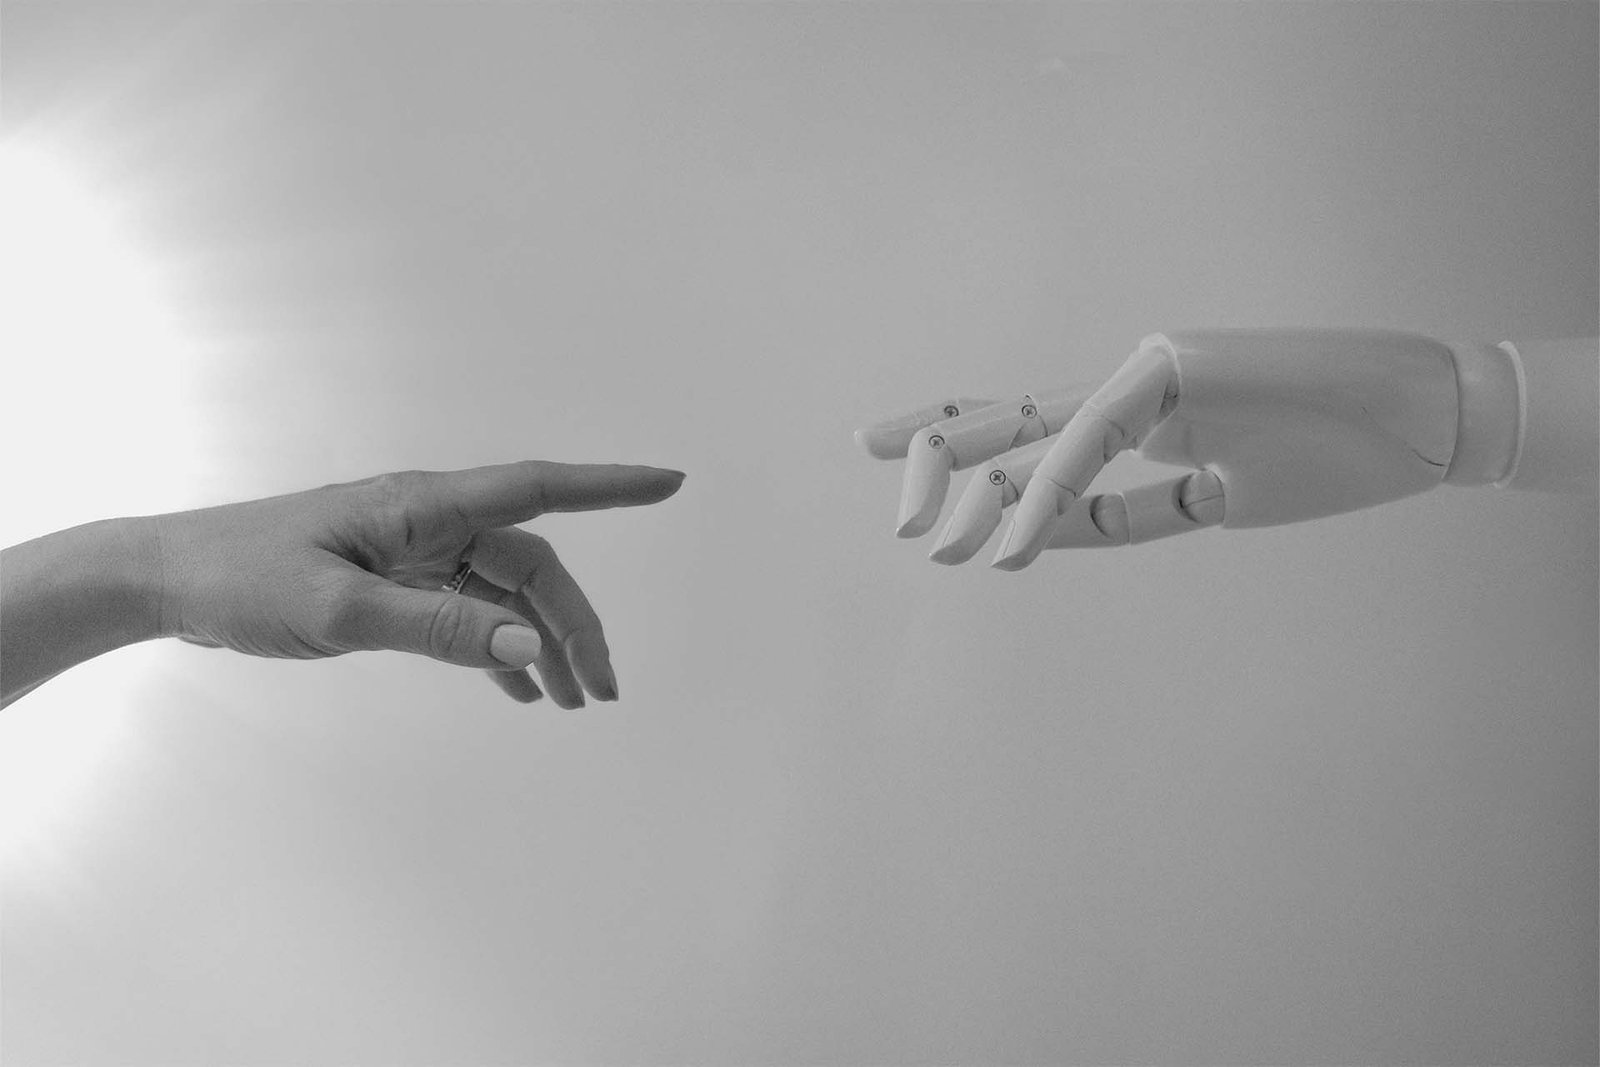 Human and robot hands about to touch